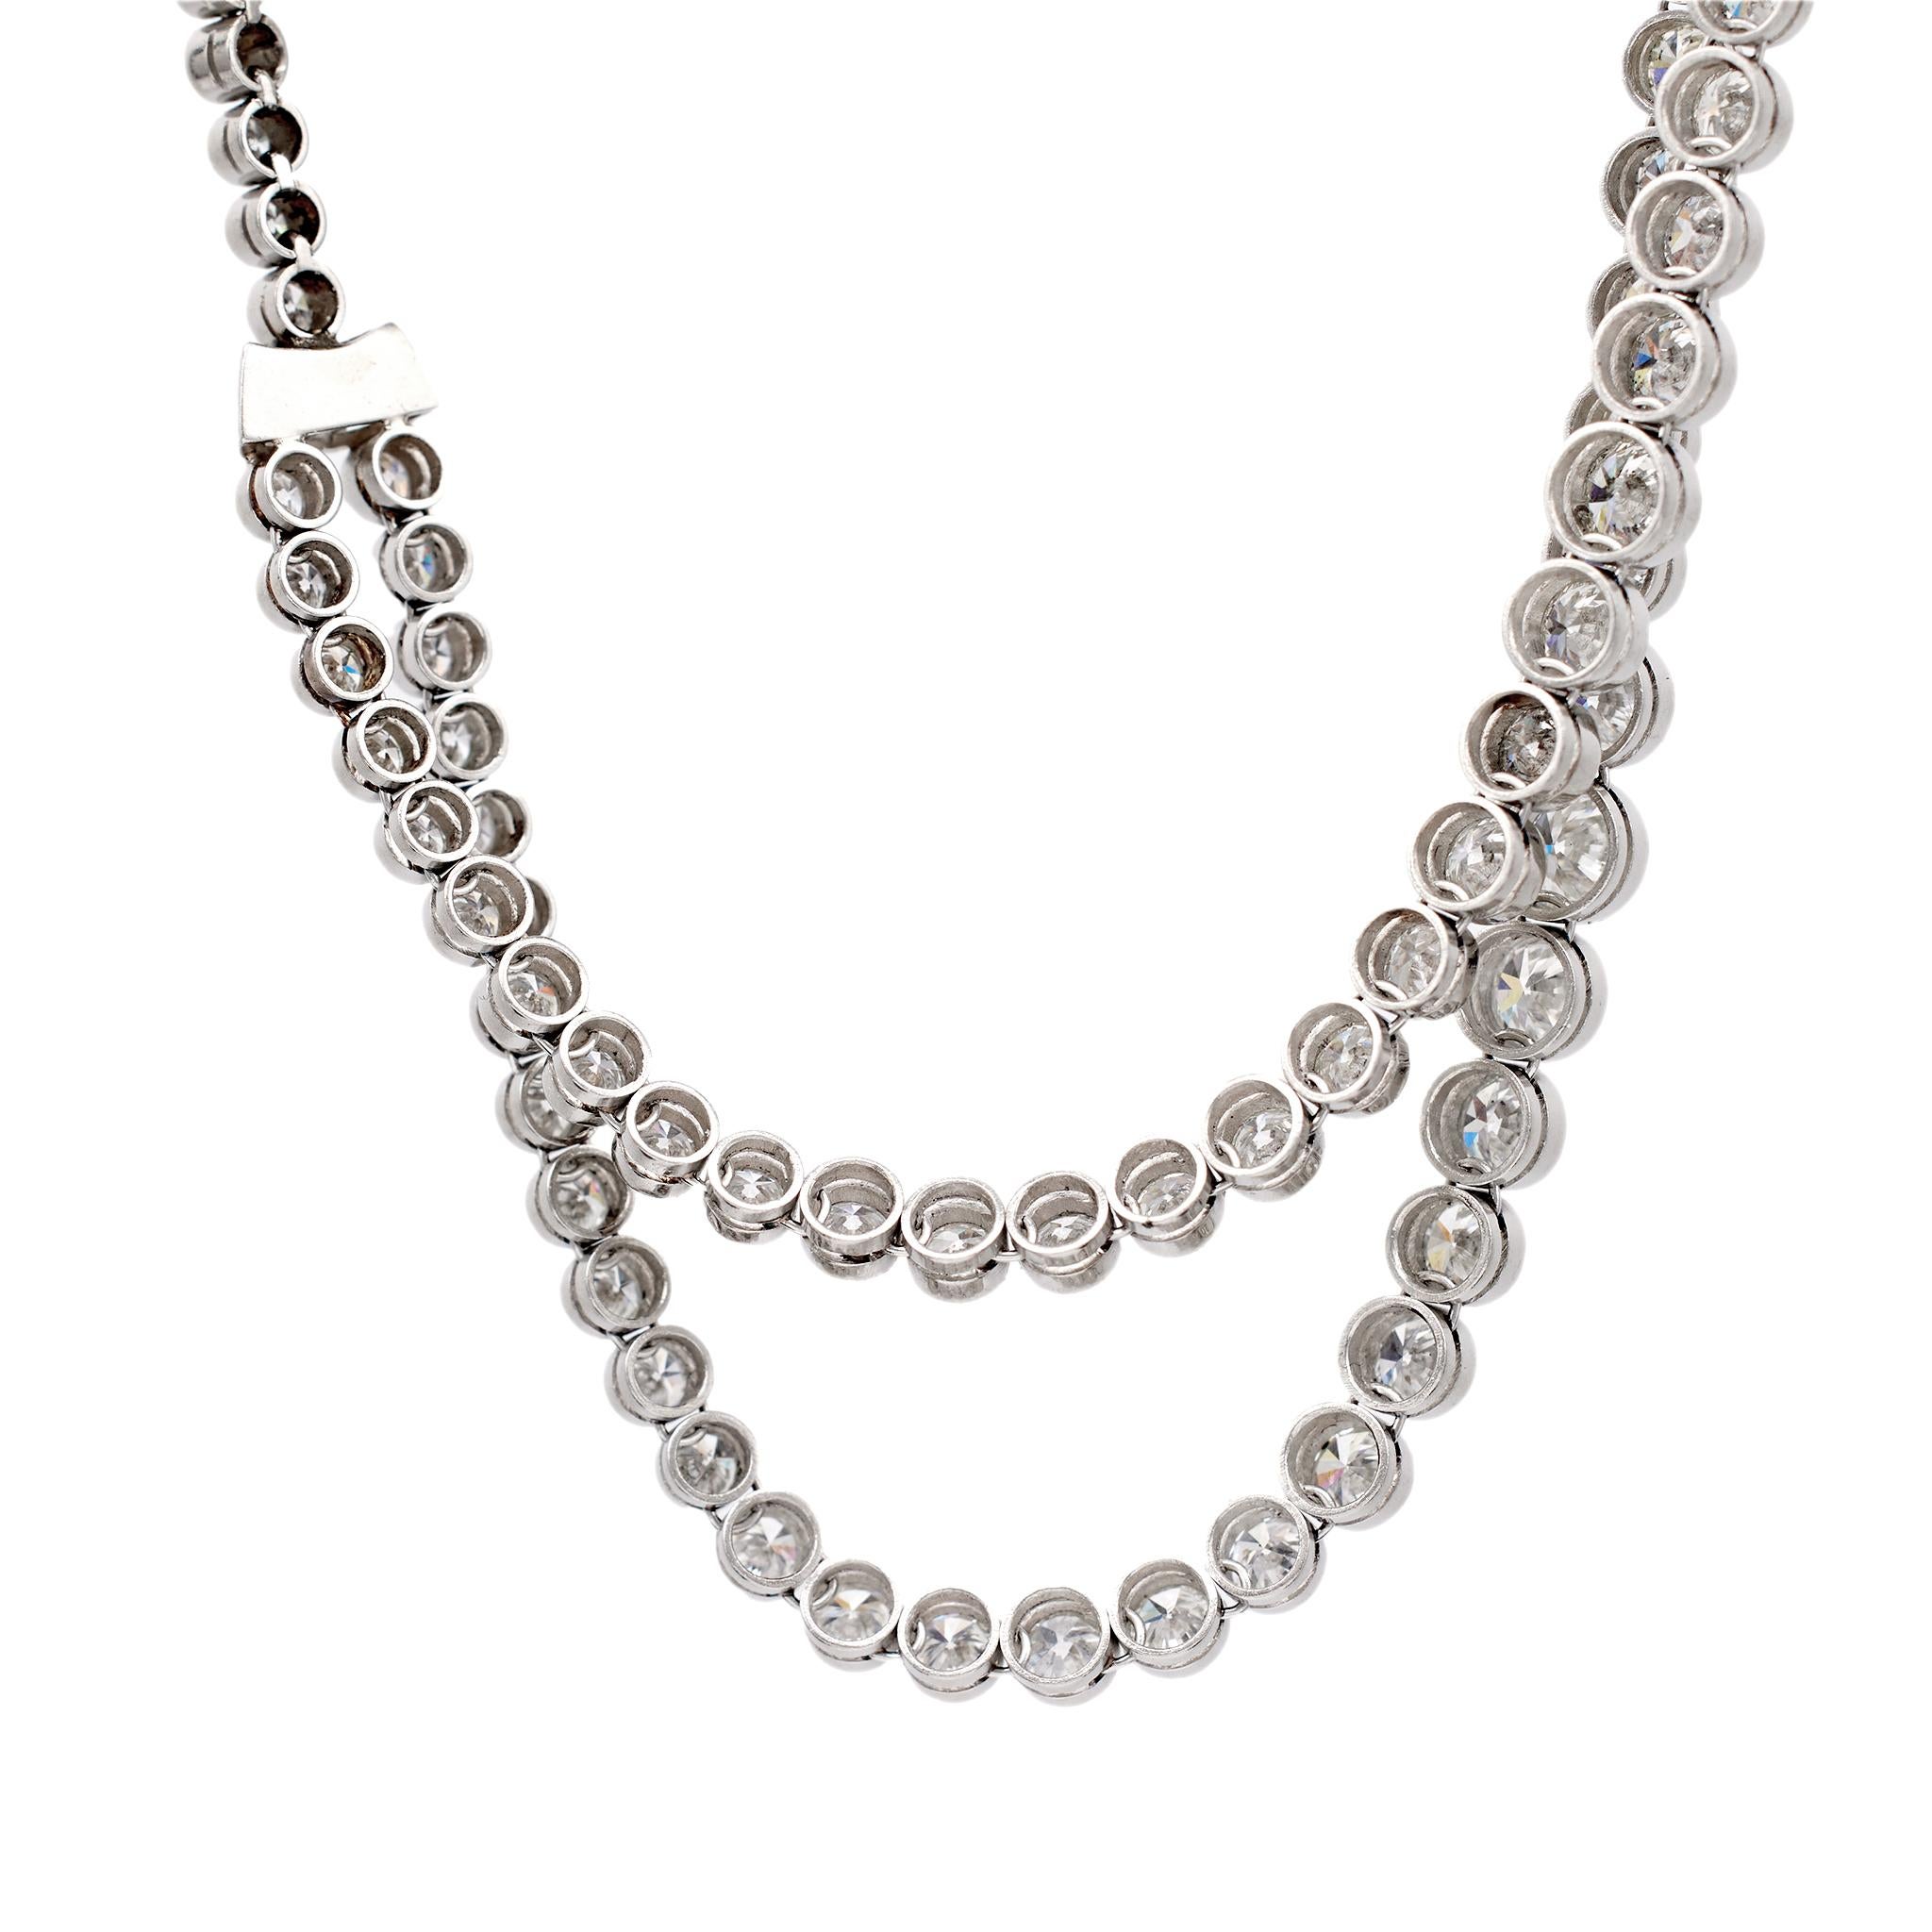 Women's or Men's Art Deco Inspired 21.85 Carat Diamond Platinum Double Strand Riviere Necklace For Sale